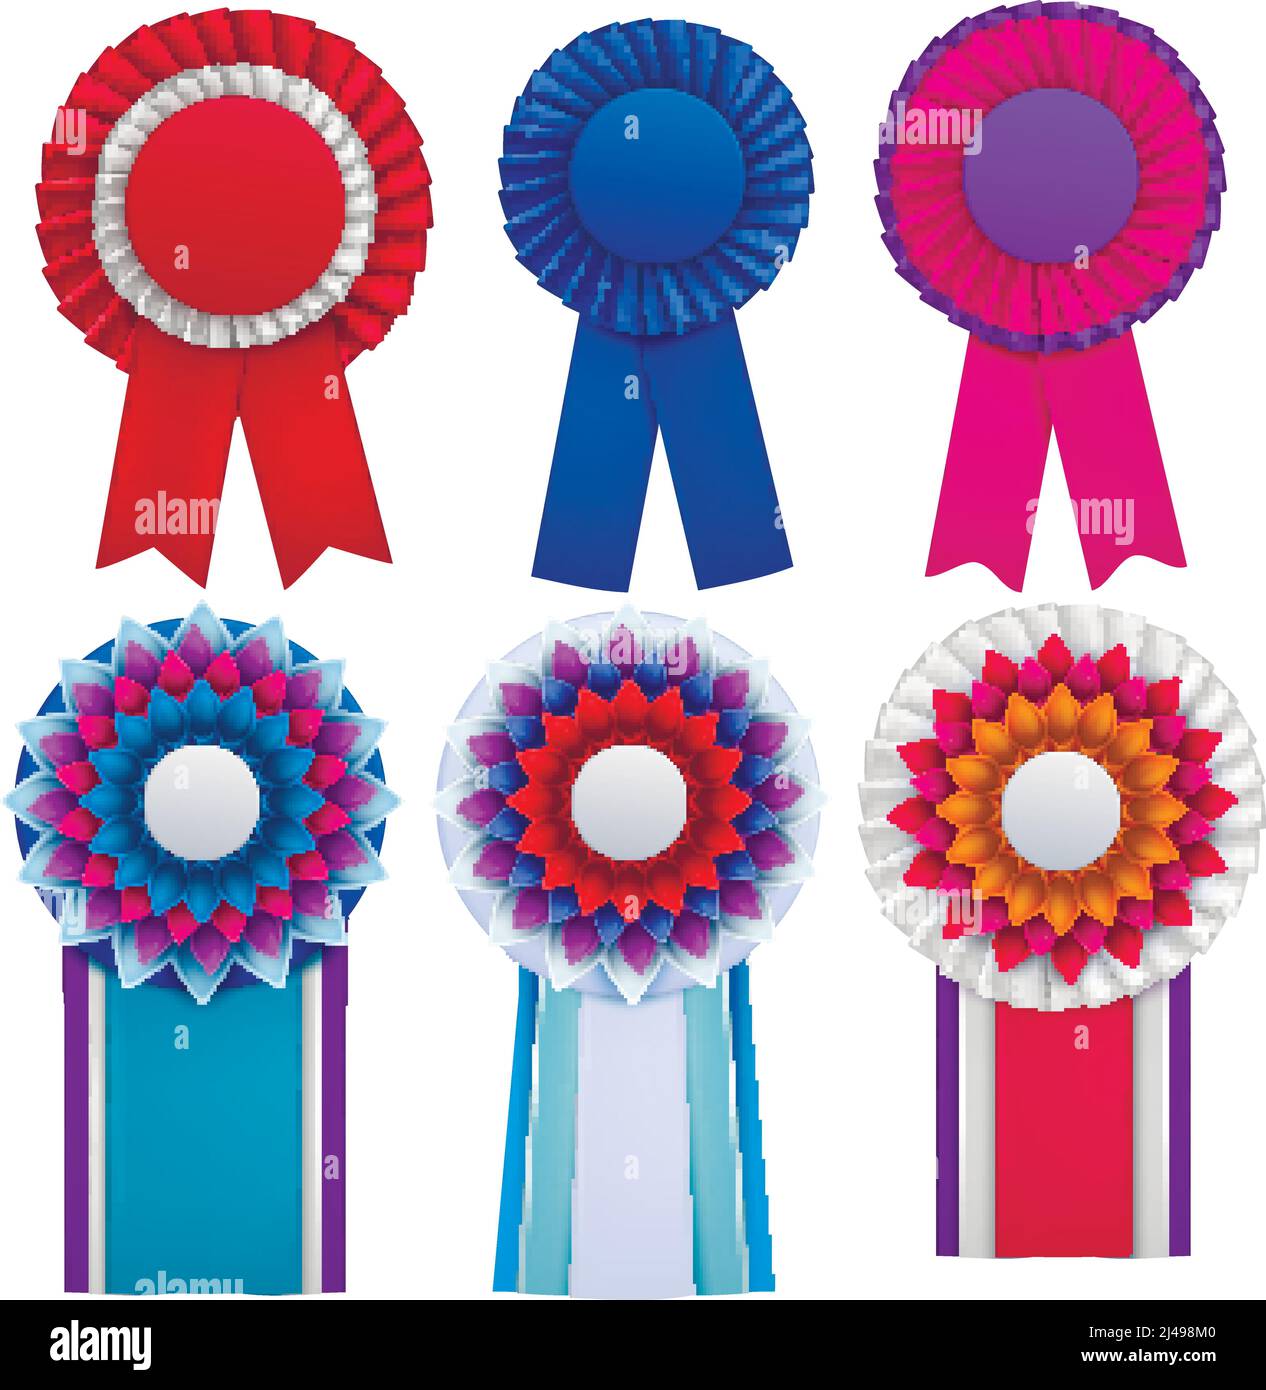 Bright blue red pink purple awards circulair rosettes badges lapel pins with ribbons realistic set vector illustration Stock Vector